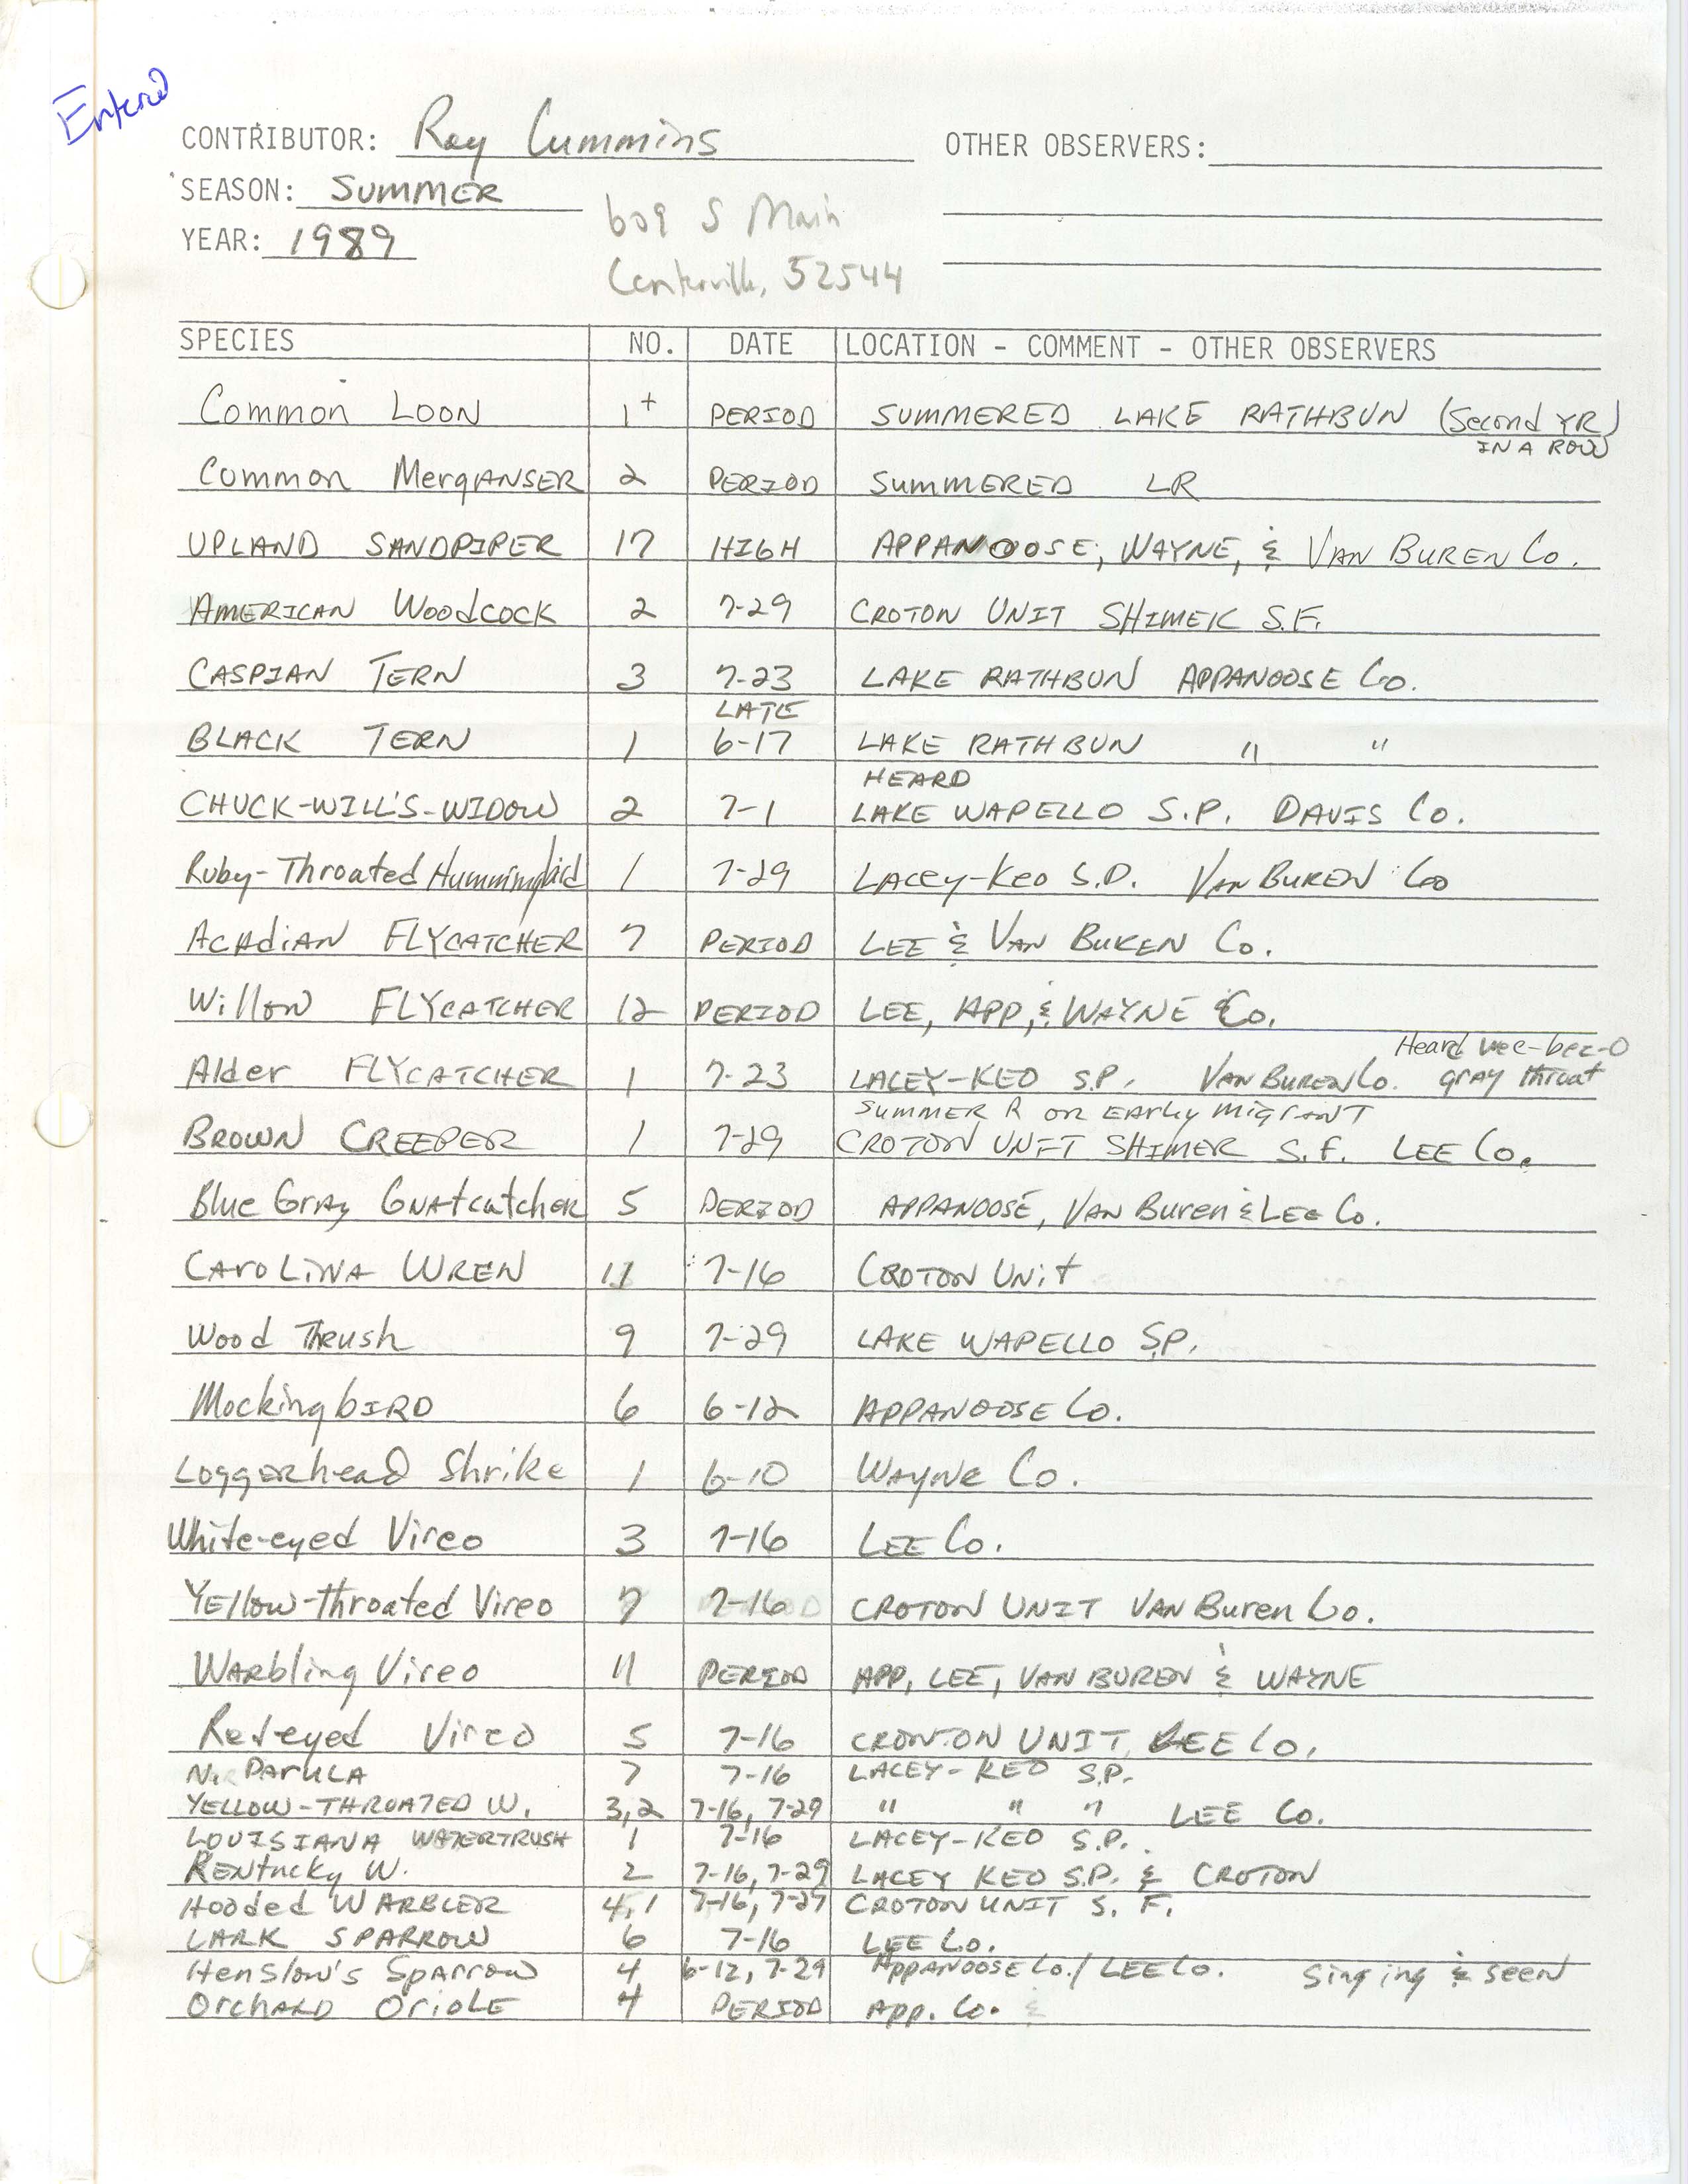 Field notes contributed by Raymond L. Cummins, summer 1989